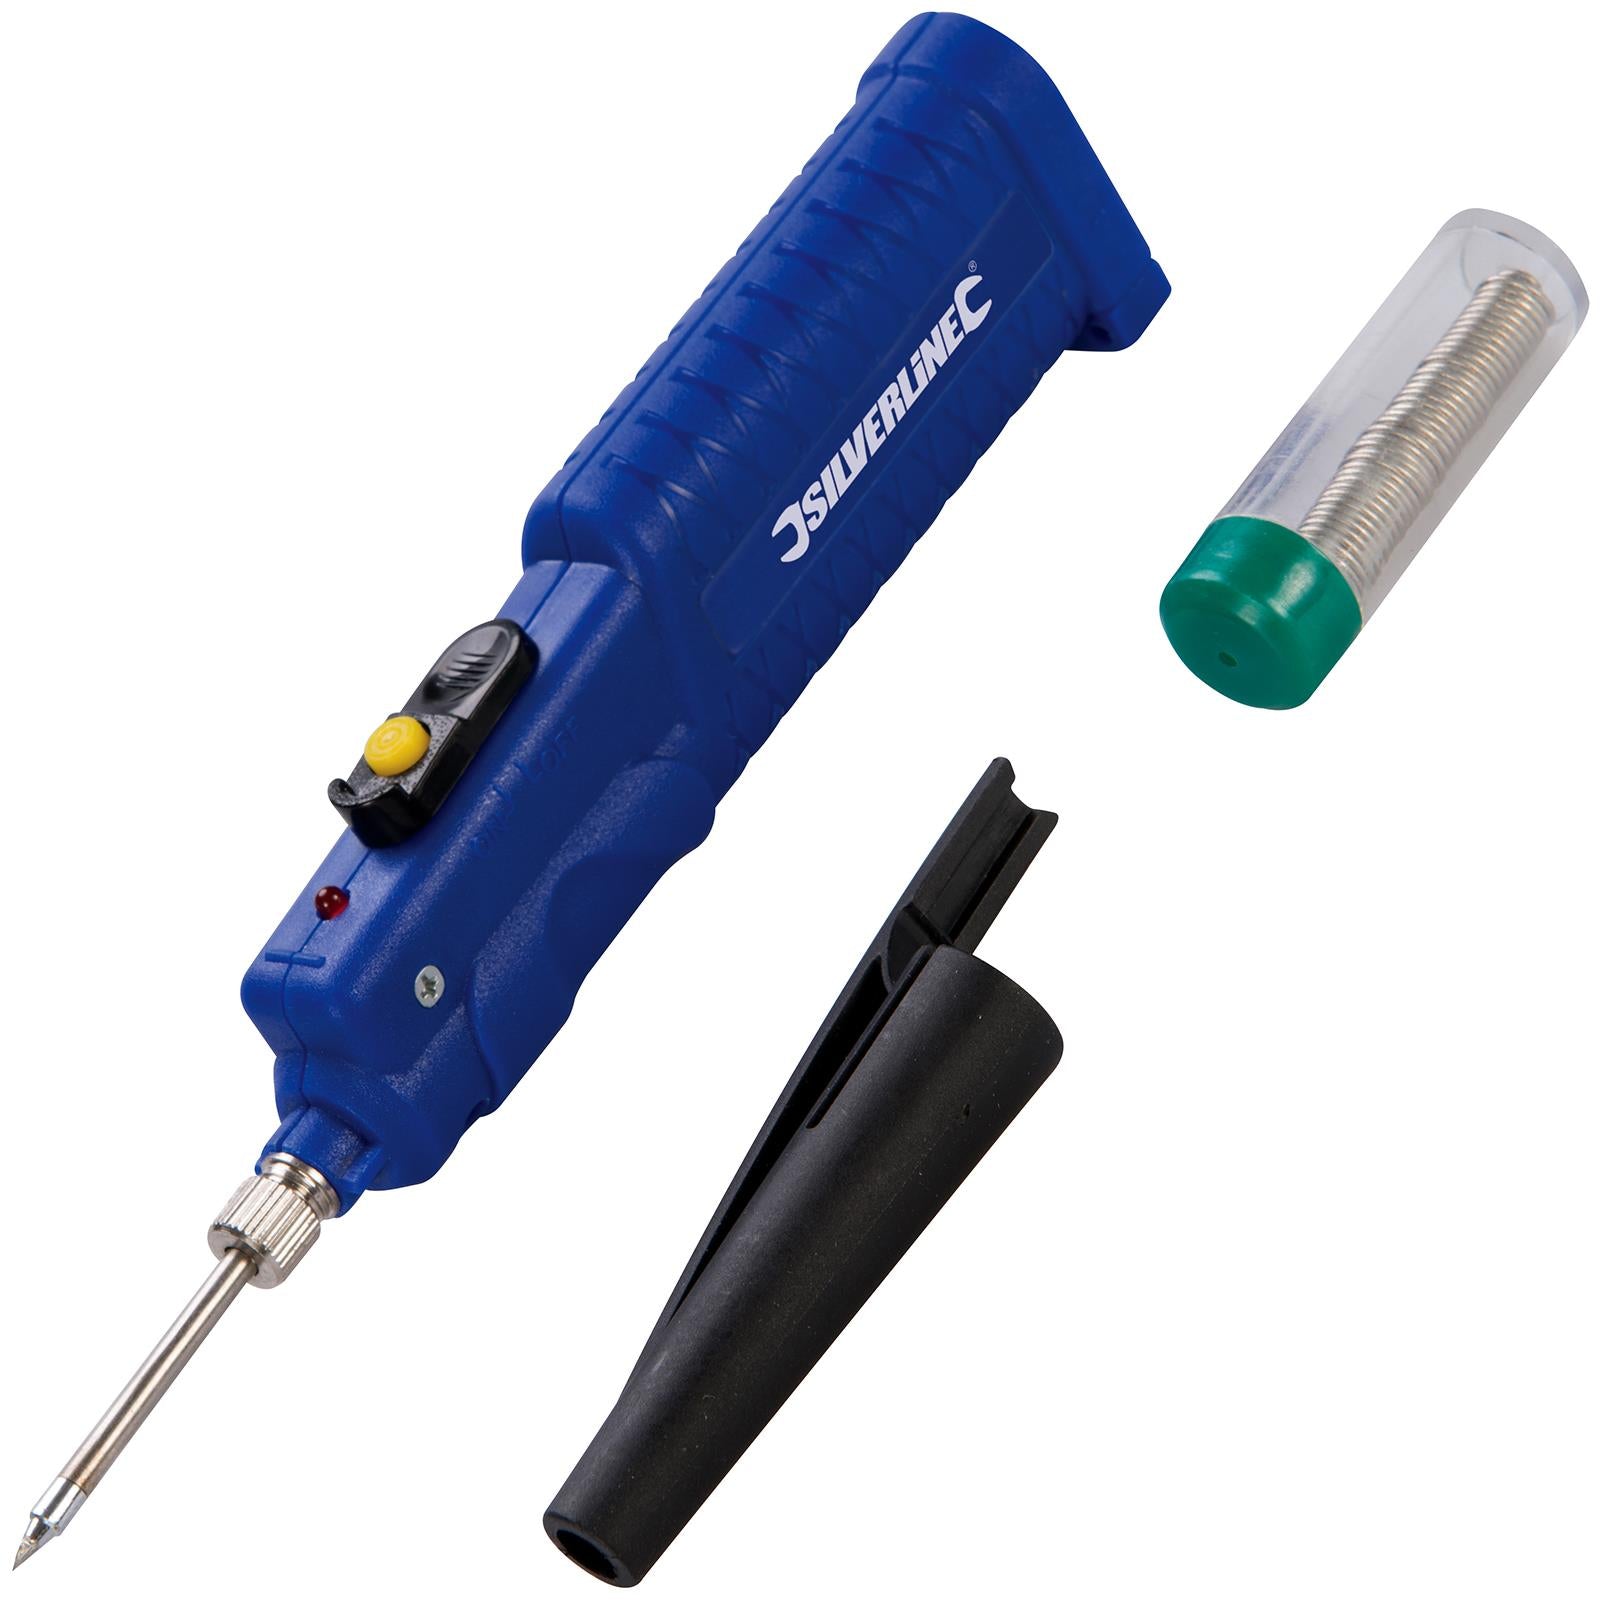 Silverline 8W Battery-Powered Soldering Iron Intricate Electronic Work